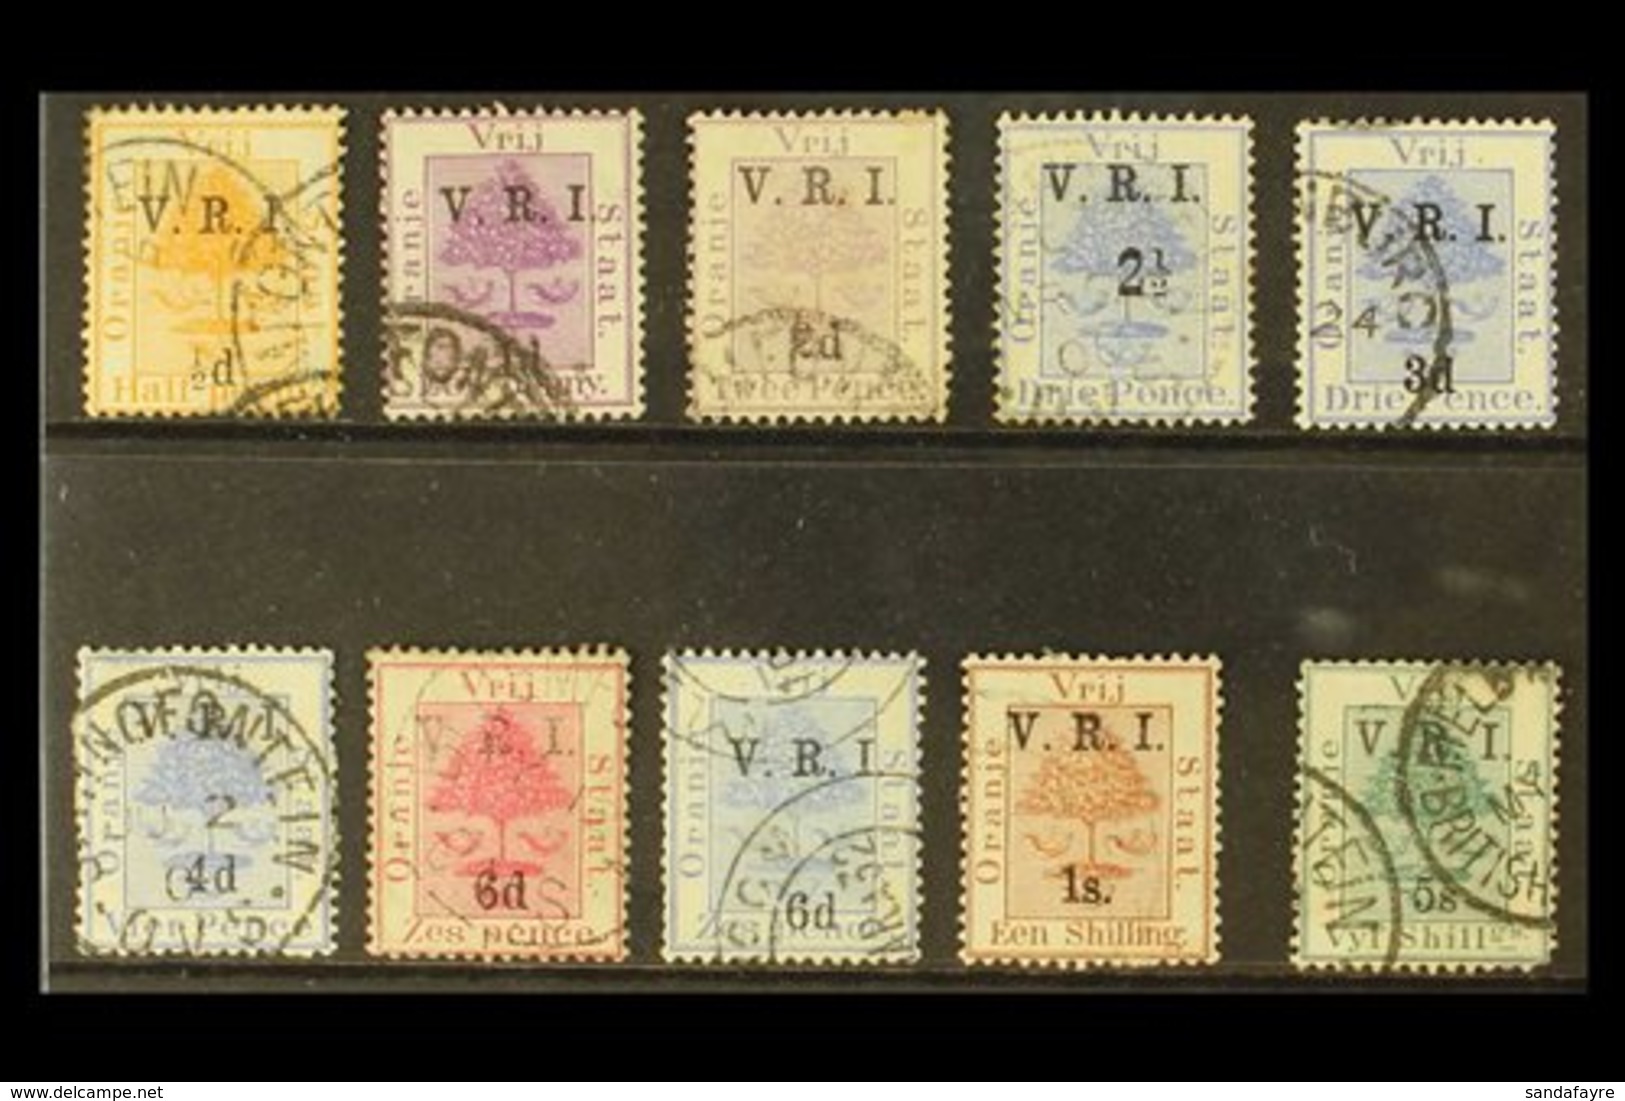 \Y ORANGE FREE STATE\Y 1900 First Printing With Level Stops Set, SG 101/111, Cds Used, The 5s With A Thin. (10 Stamps) F - Unclassified